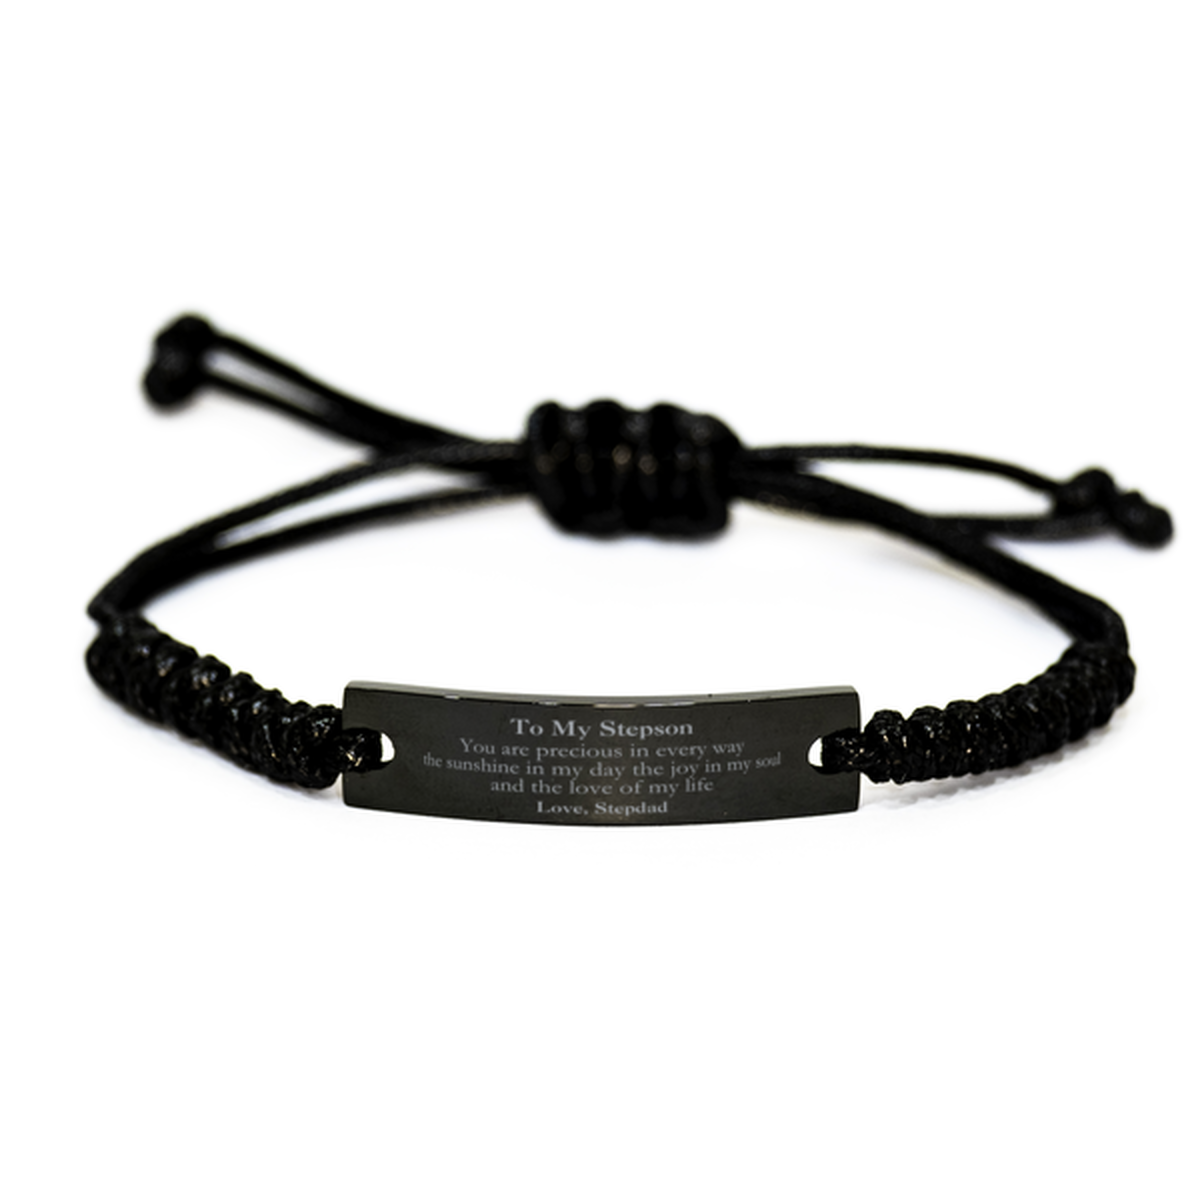 Graduation Gifts for Stepson Black Rope Bracelet Present from Stepdad, Christmas Stepson Birthday Gifts Stepson You are precious in every way the sunshine in my day. Love, Stepdad